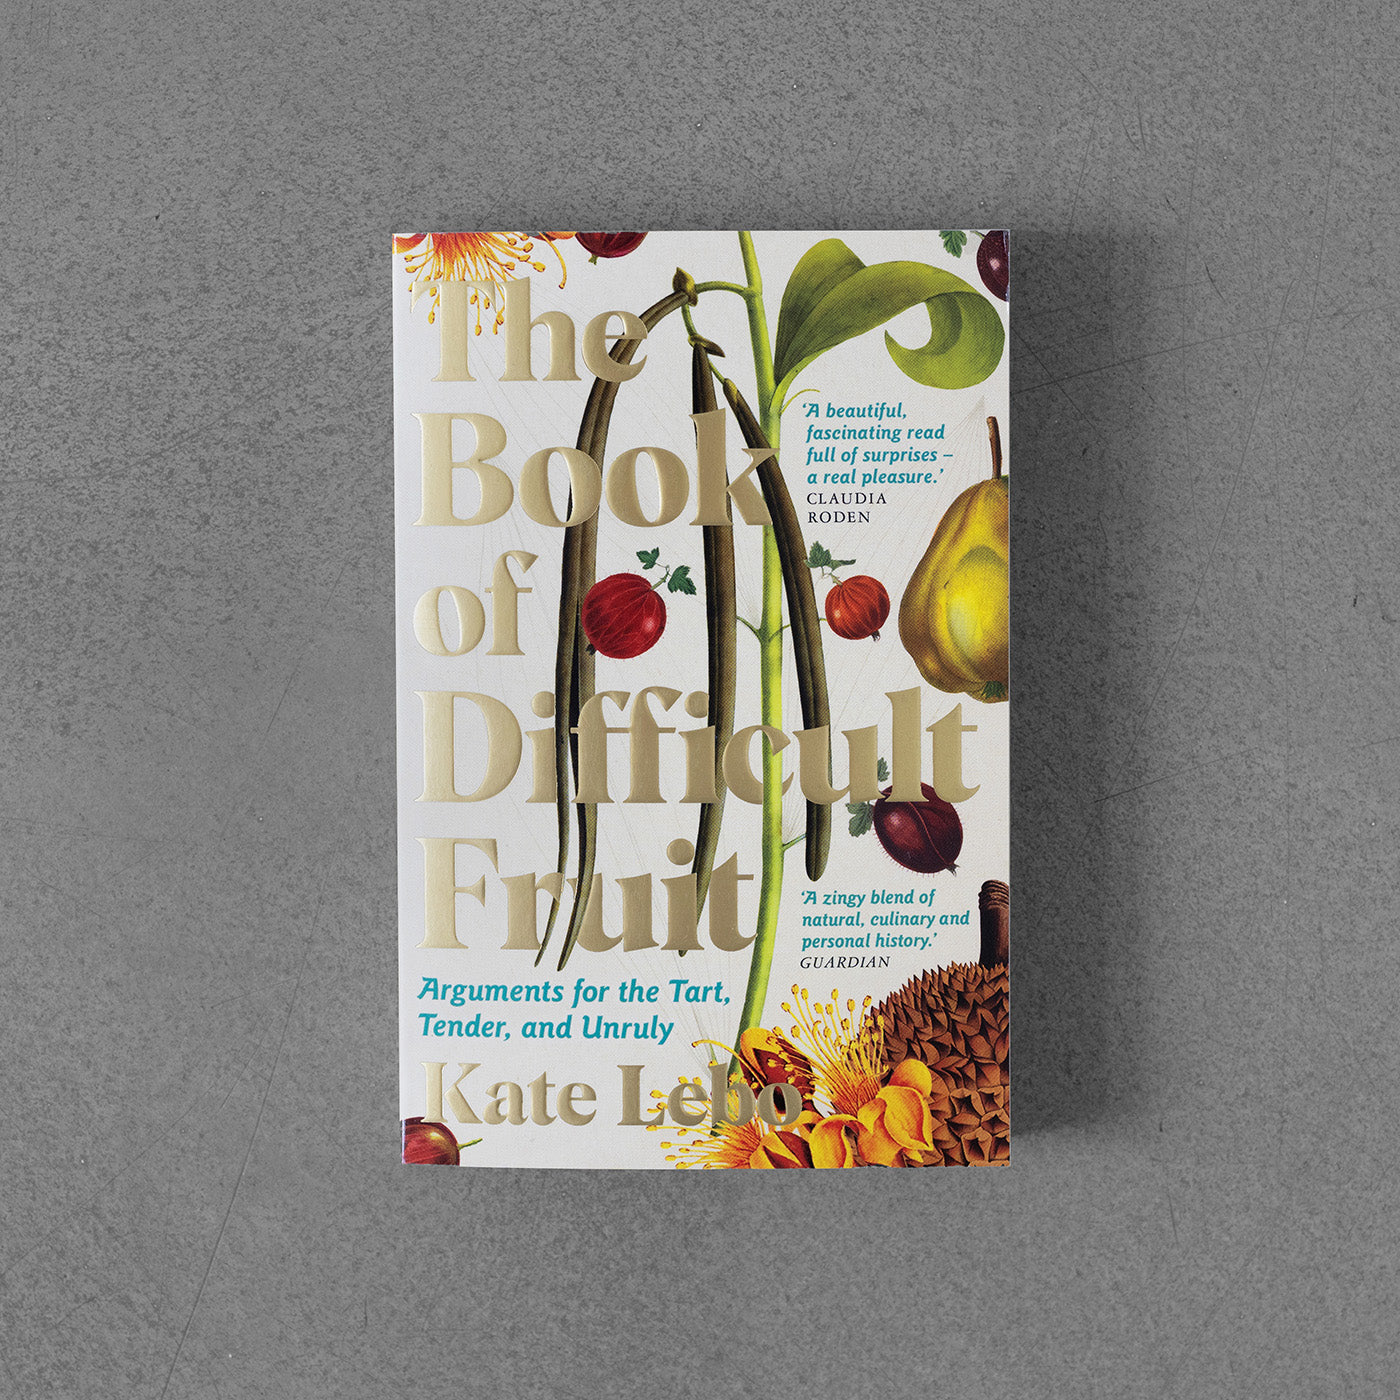 Book of Difficult Fruit: Arguments for the Tart, Tender, and Unruly – Kate Lebo